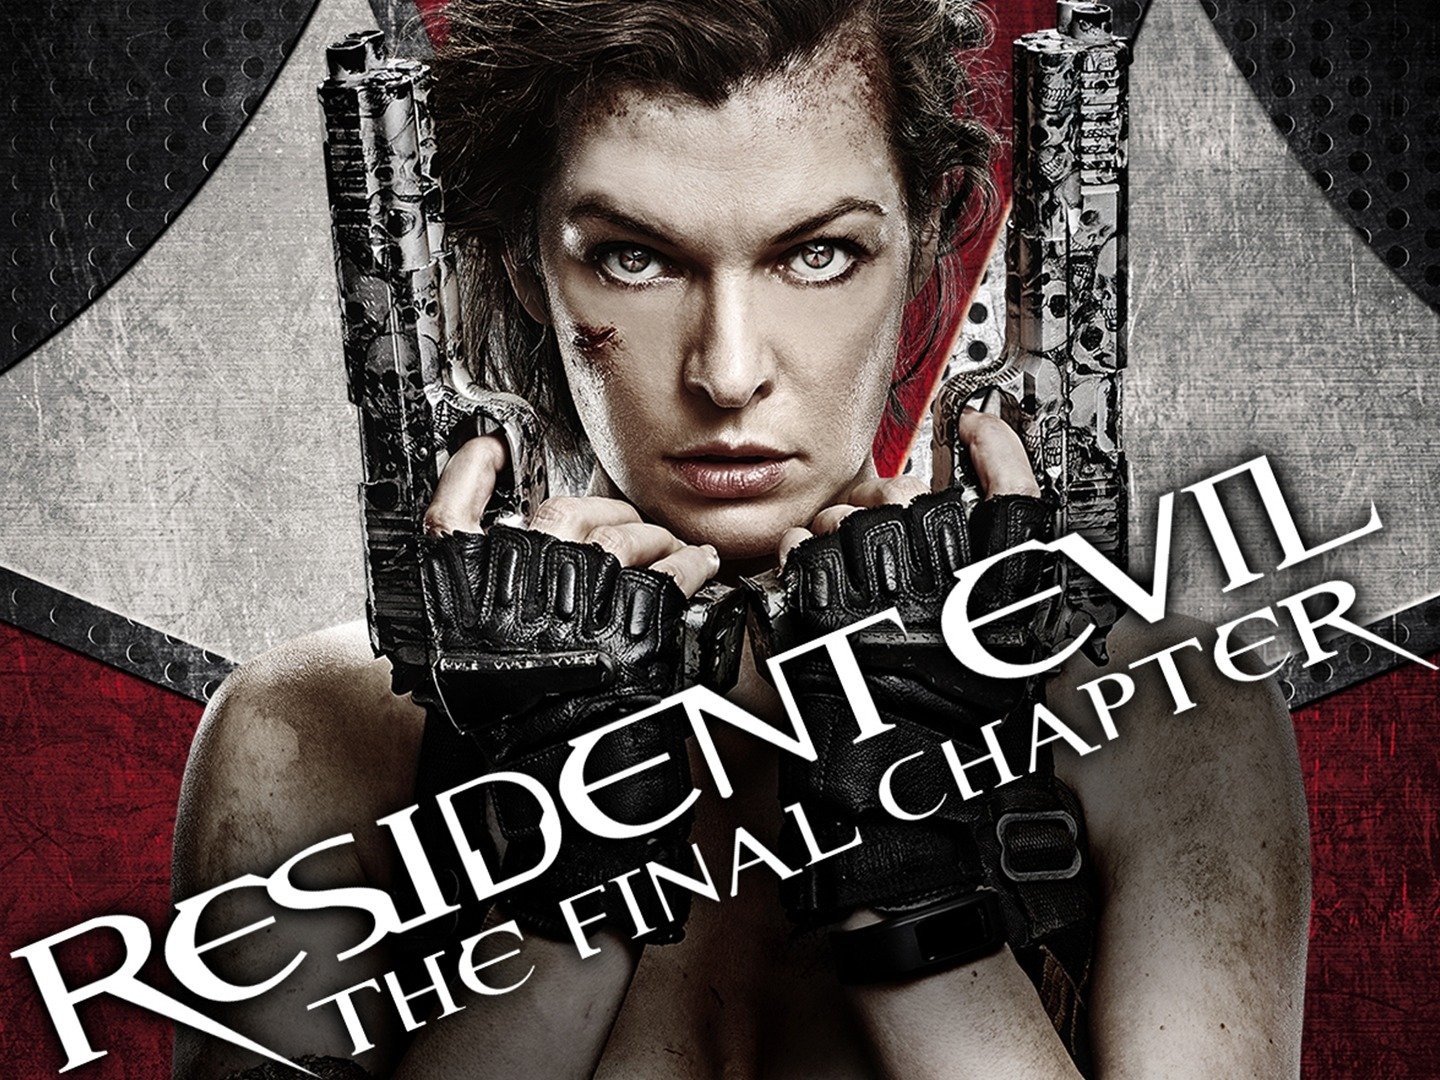 Meet the last survivors in 'Resident Evil: The Final Chapter' – CinemaBravo